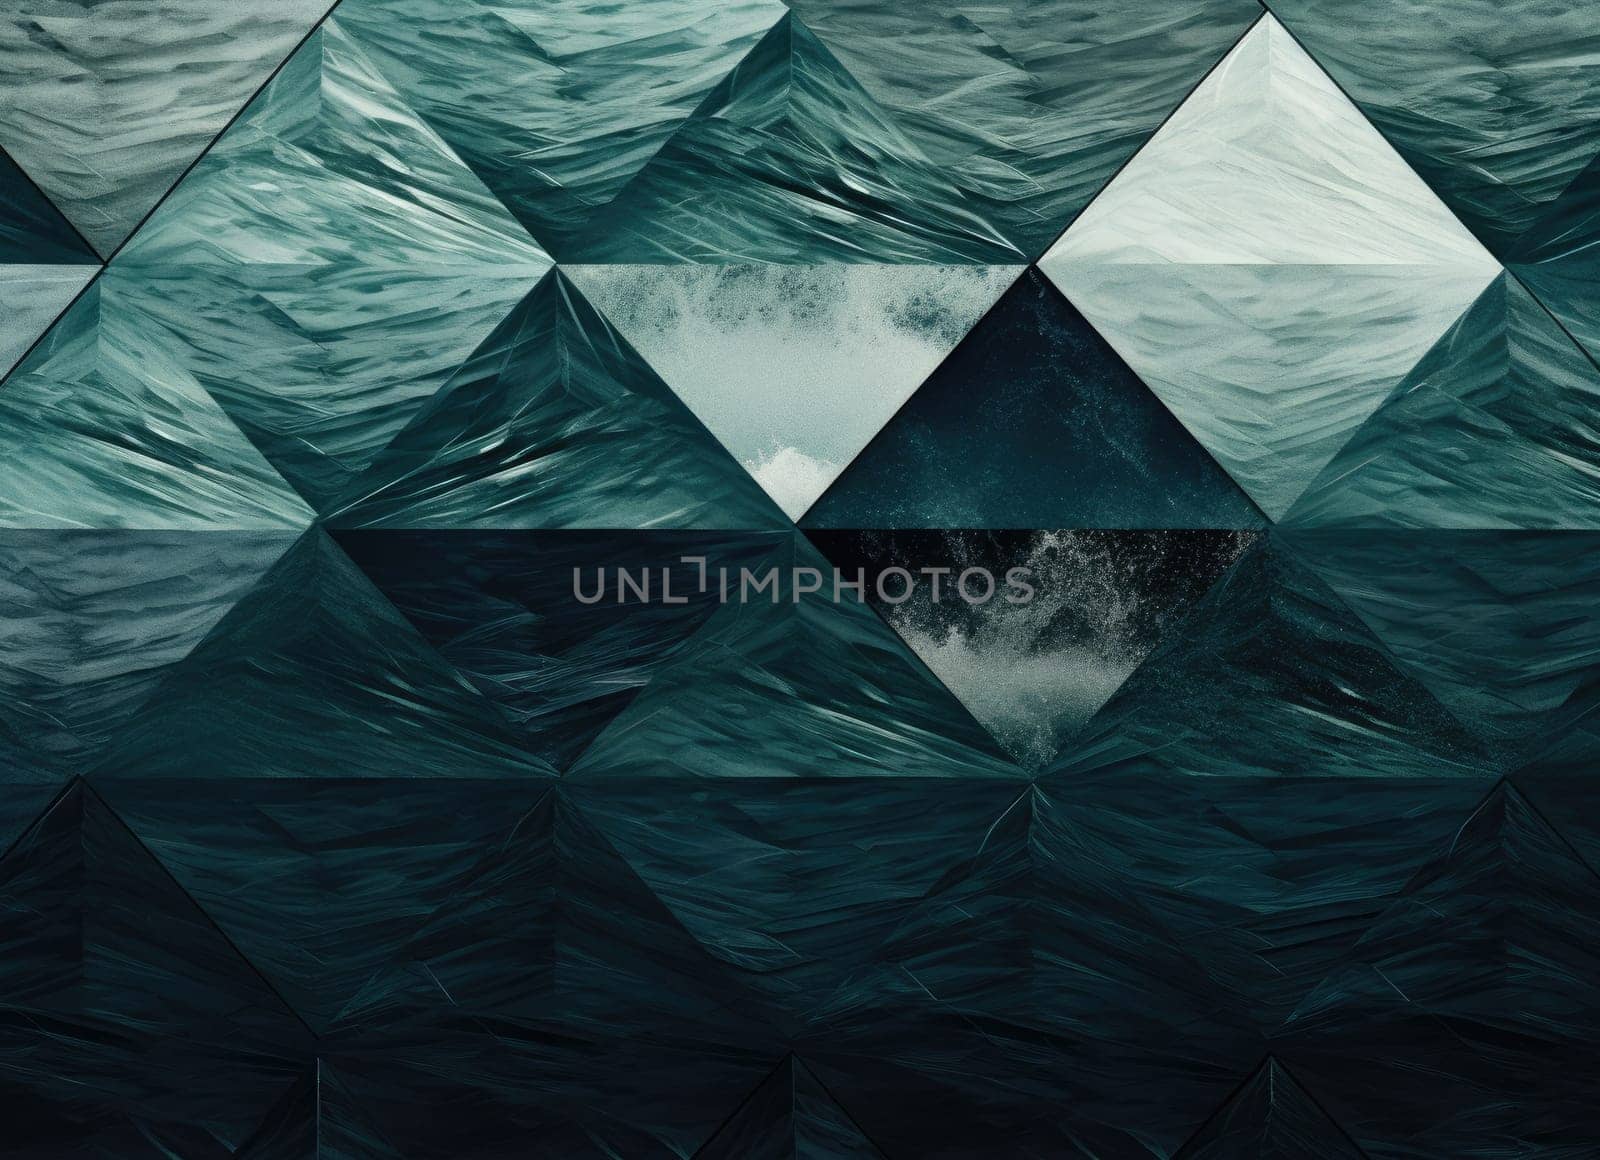 abstract ocean background with geometry shapes and water waves comeliness by biancoblue